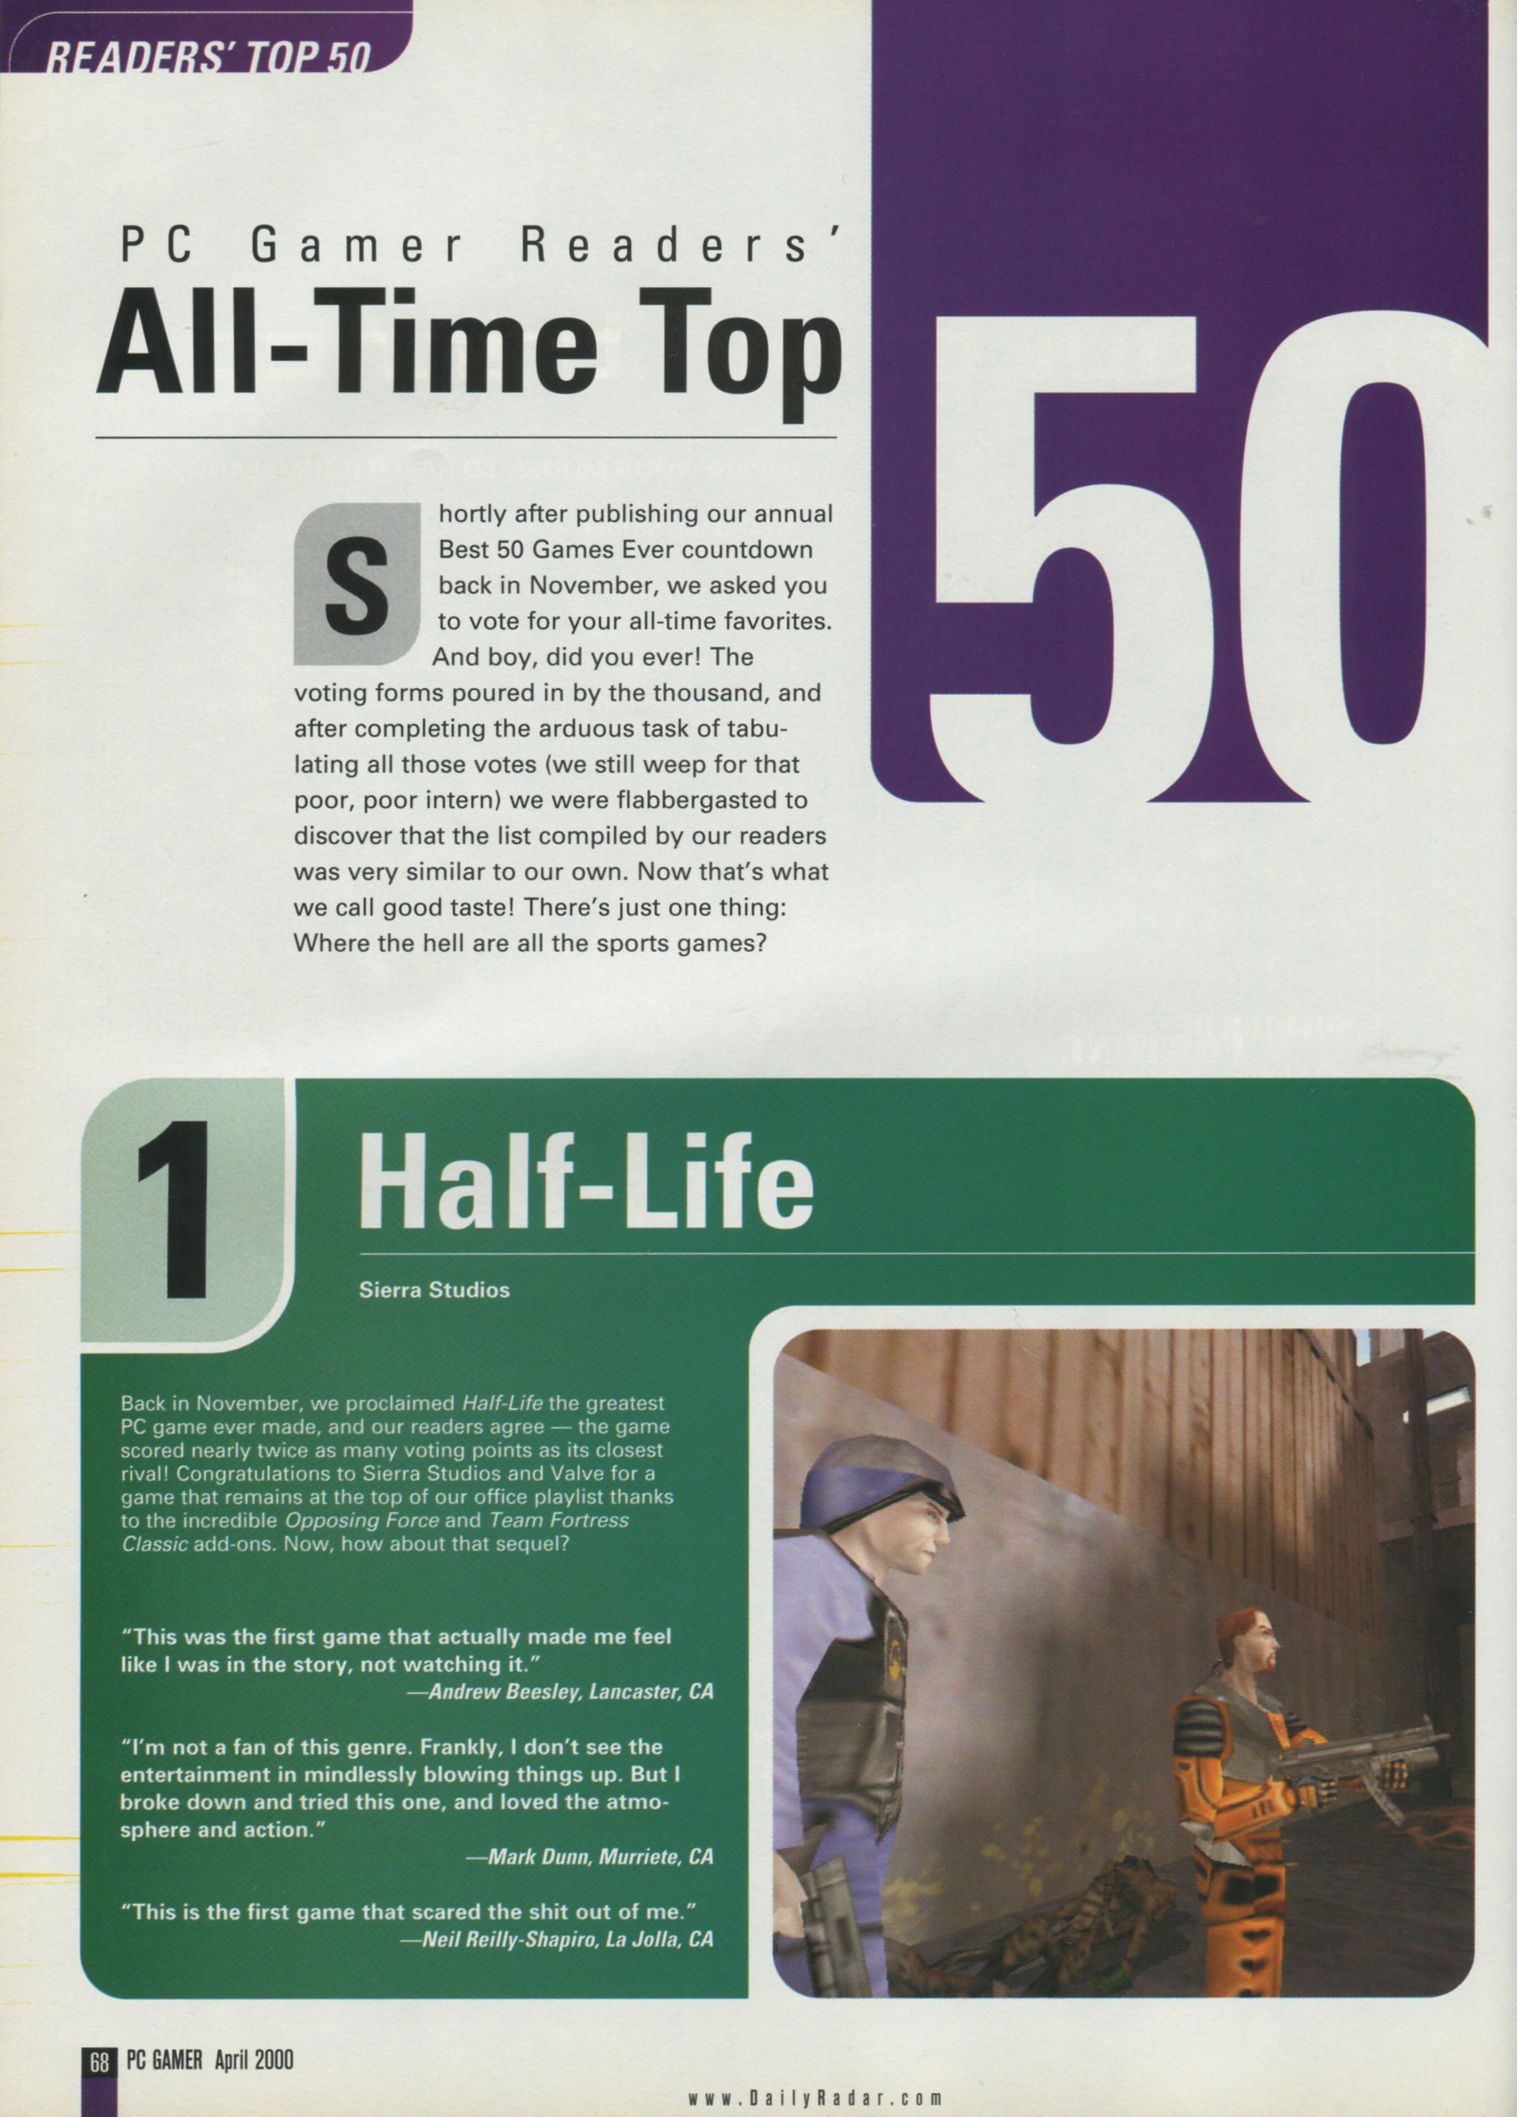 PC Gamer (US): Issue 71 April 2000 